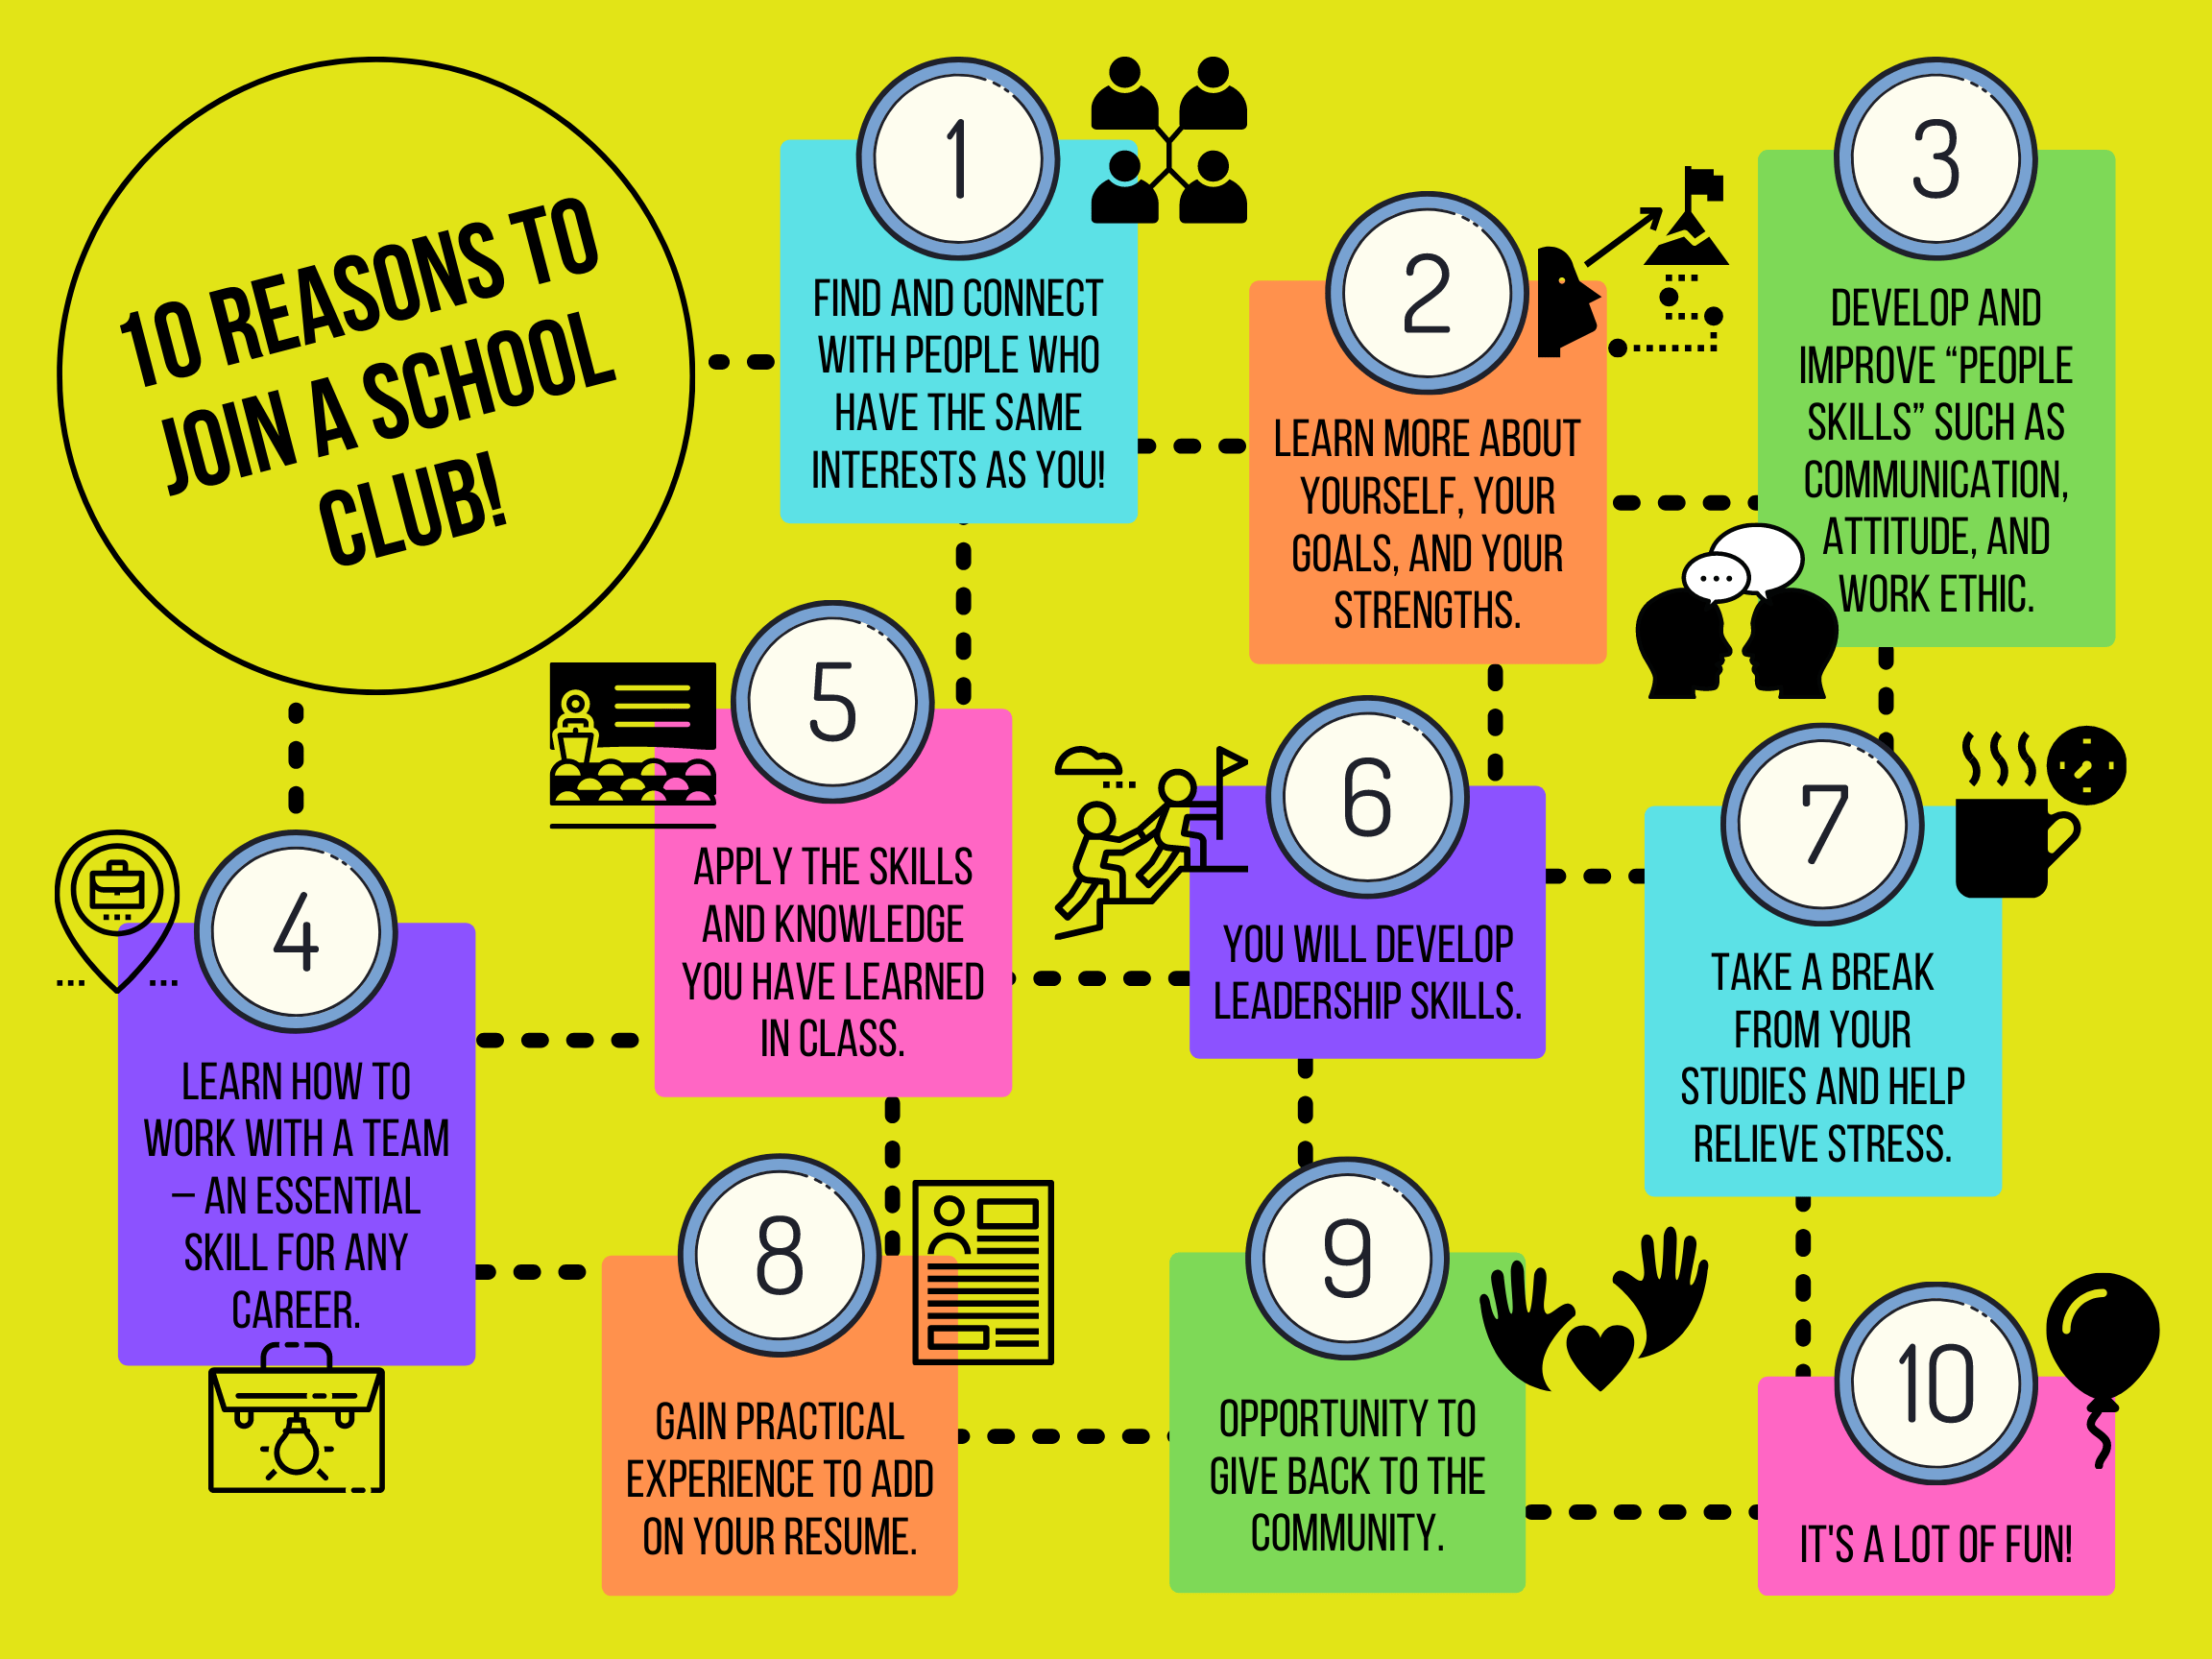 10 reasons to join a club